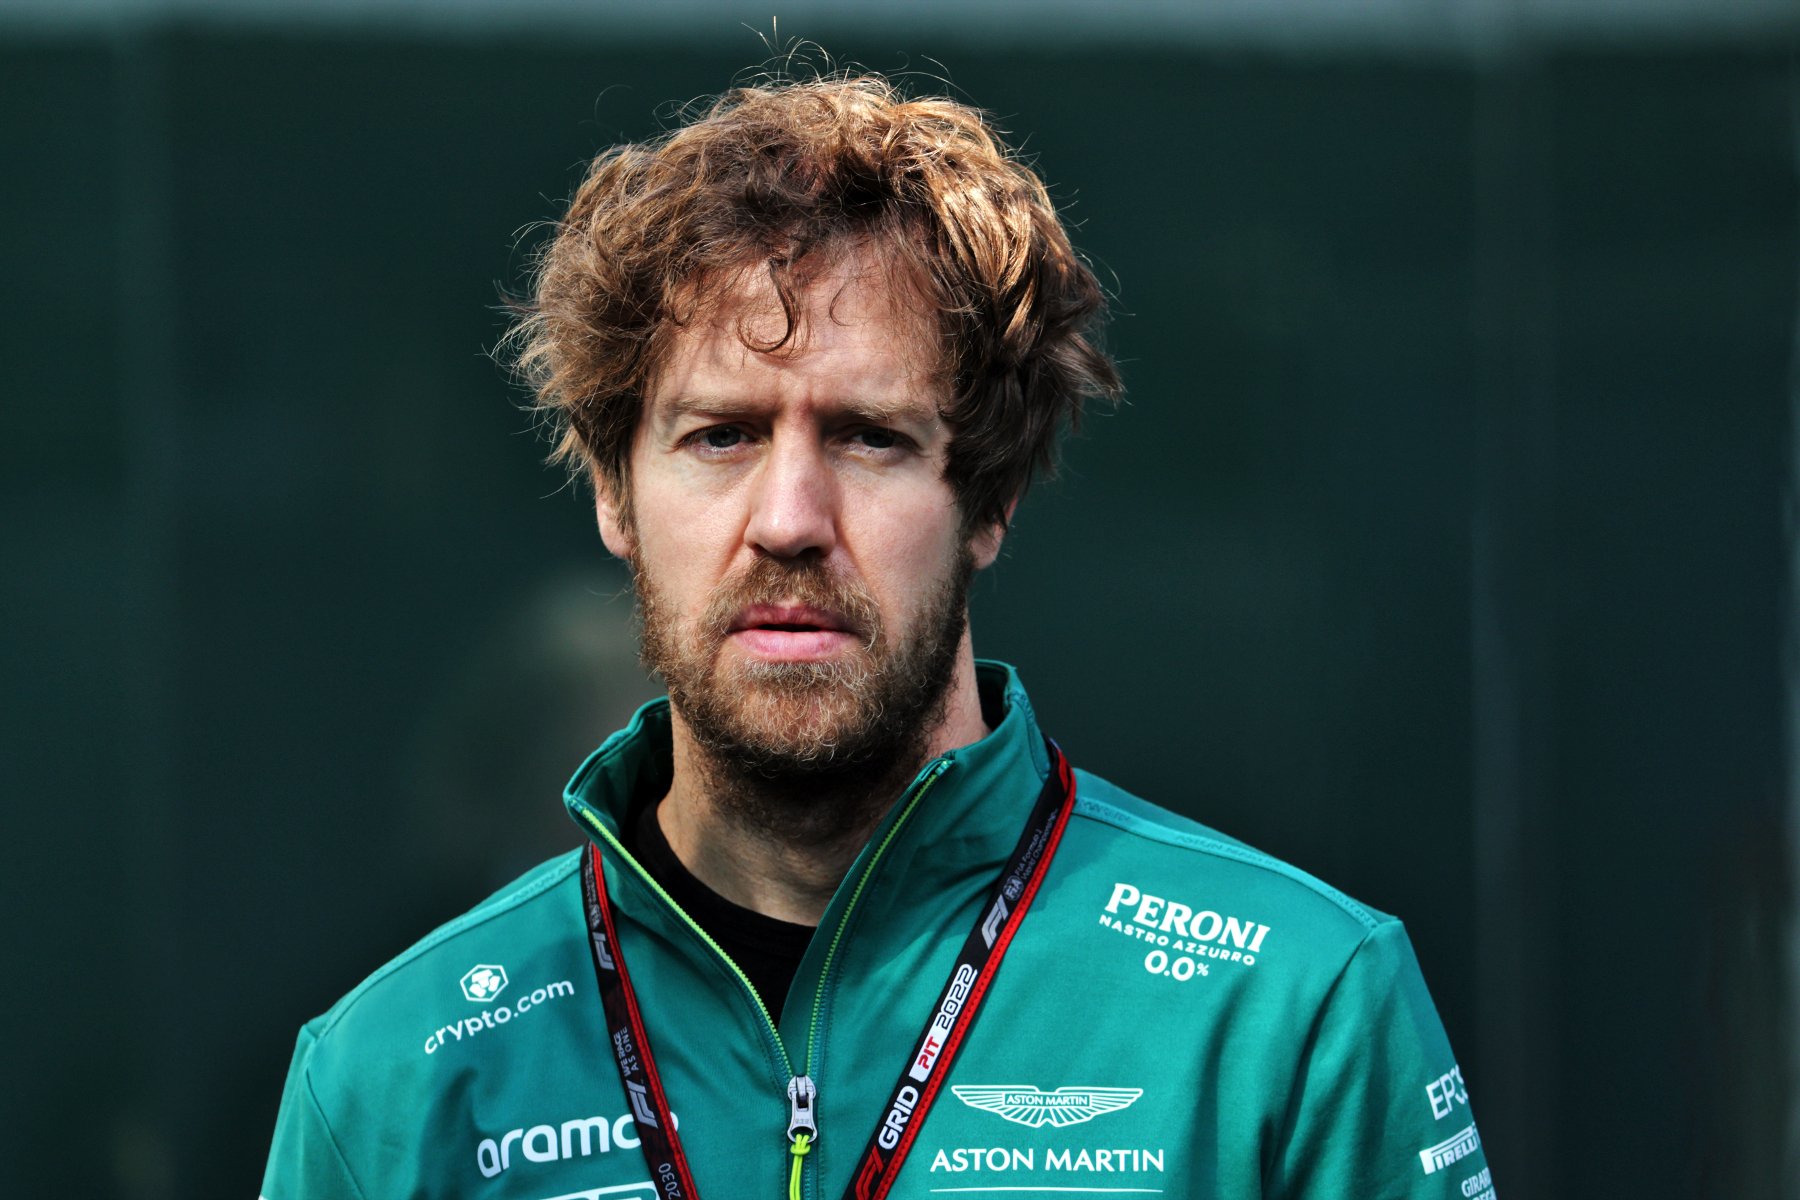  Vettel says drivers have an uphill task in terms of getting the better of 2022 cars